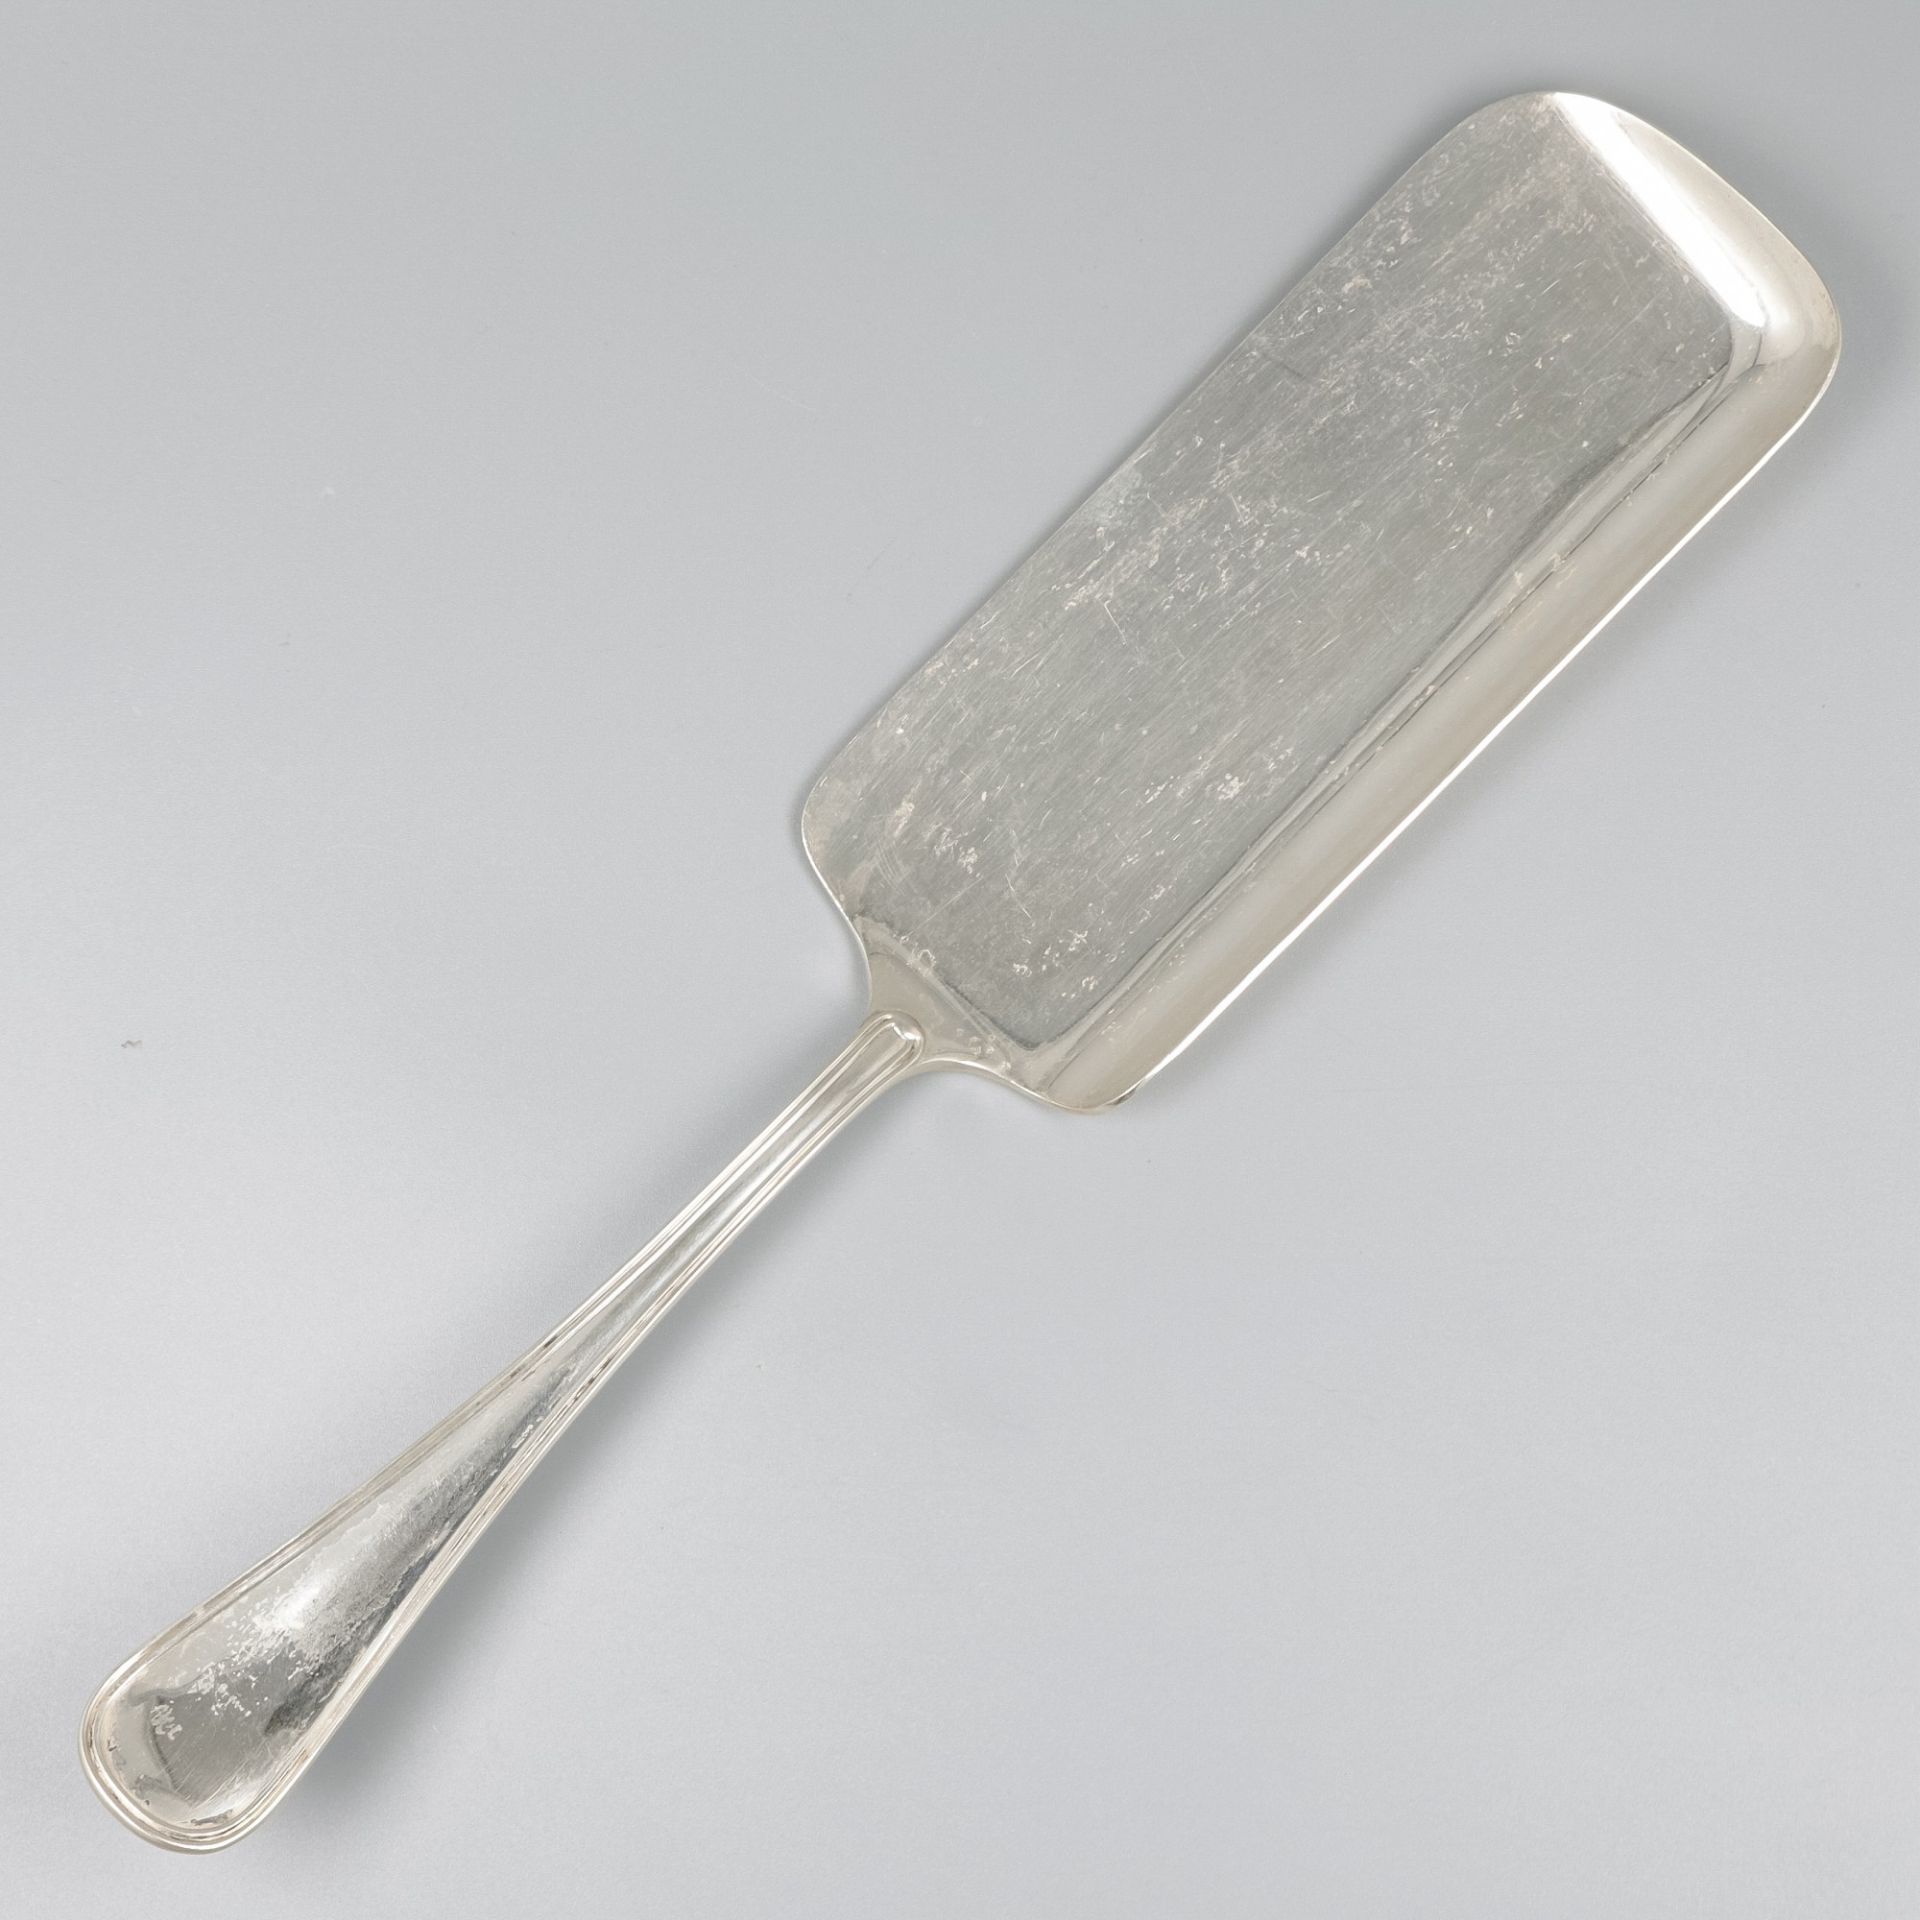 Fish slice "Hollands Rondfilet", silver.